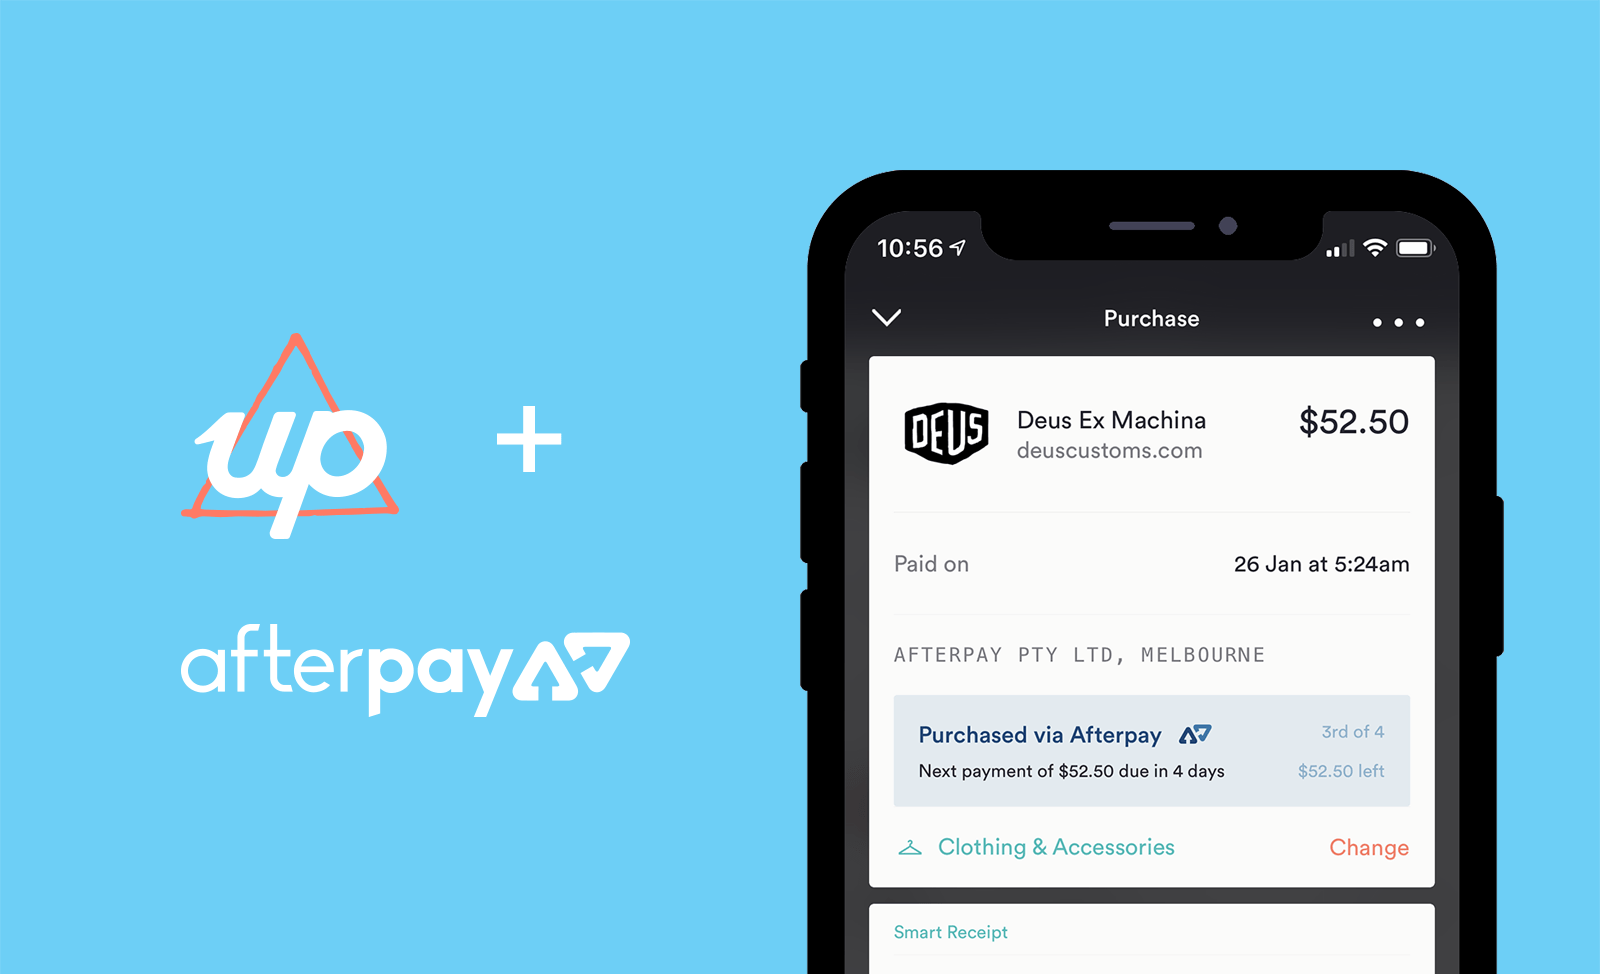 Up and AfterPay are now connected